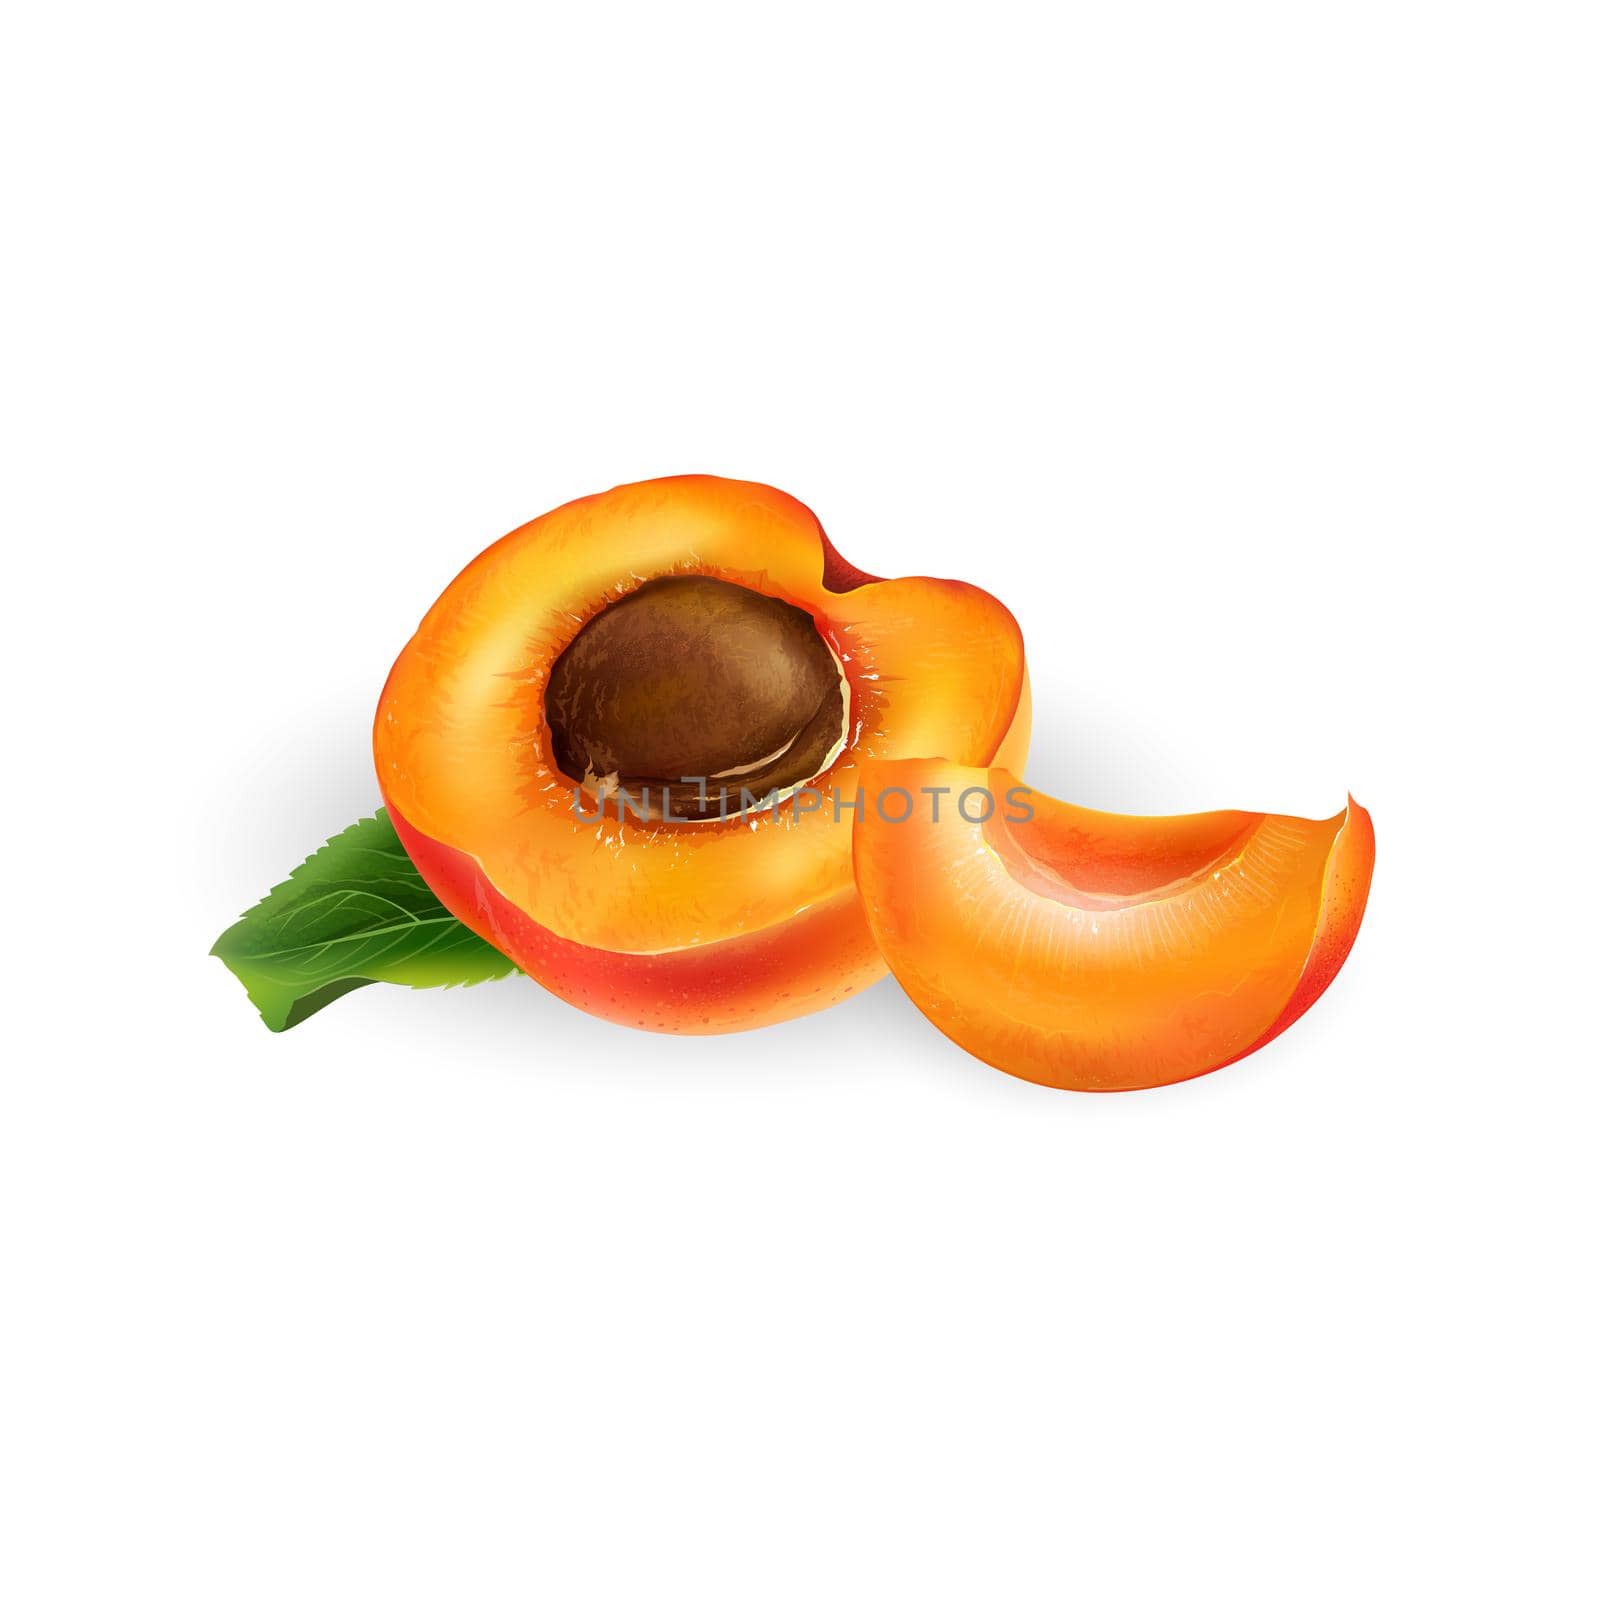 Ripe apricot half with pit and a slice on a white background. by ConceptCafe